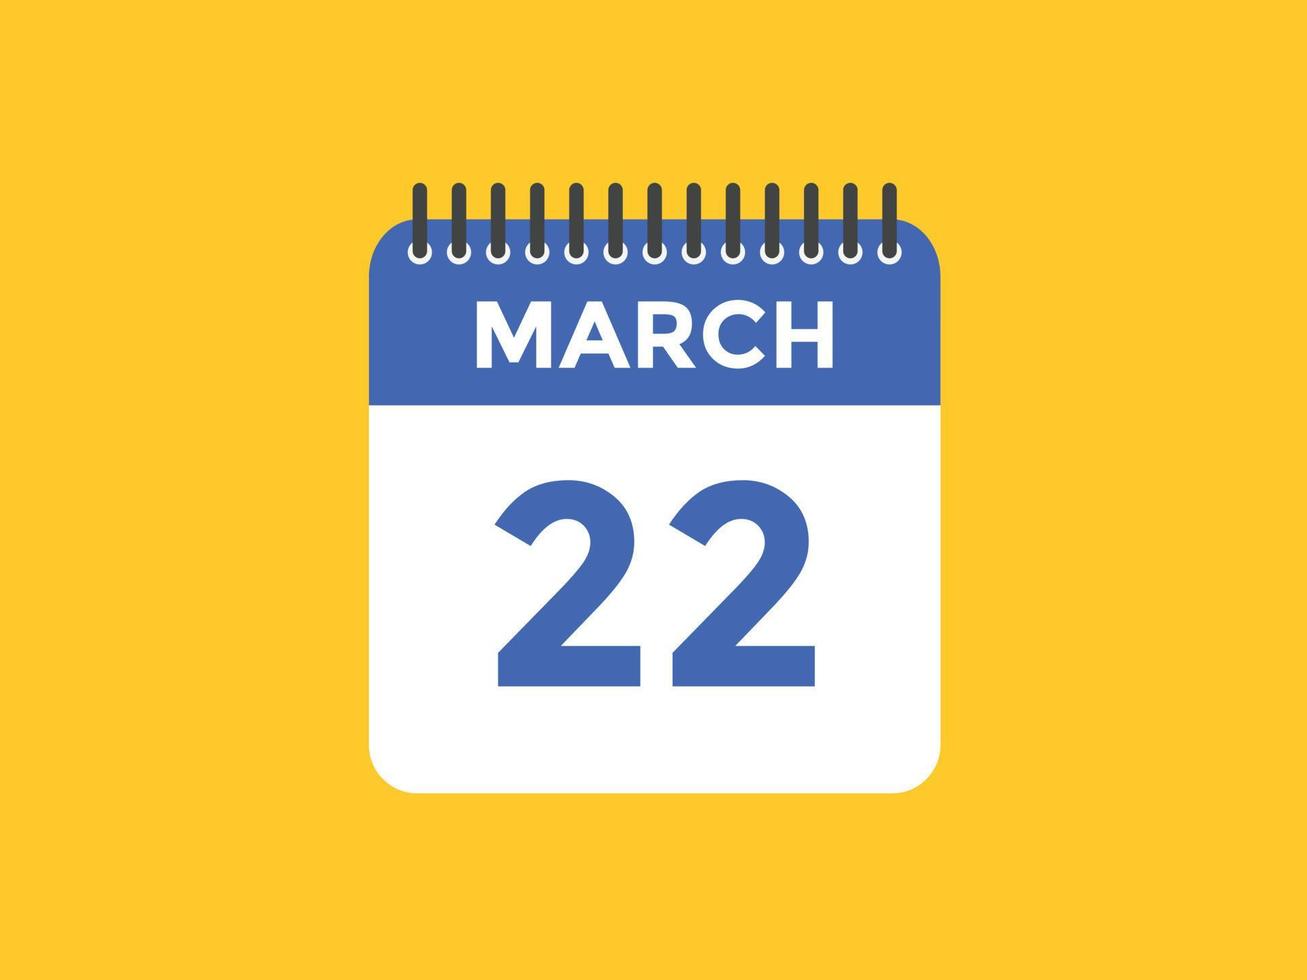 march 22 calendar reminder. 22th march daily calendar icon template. Calendar 22th march icon Design template. Vector illustration